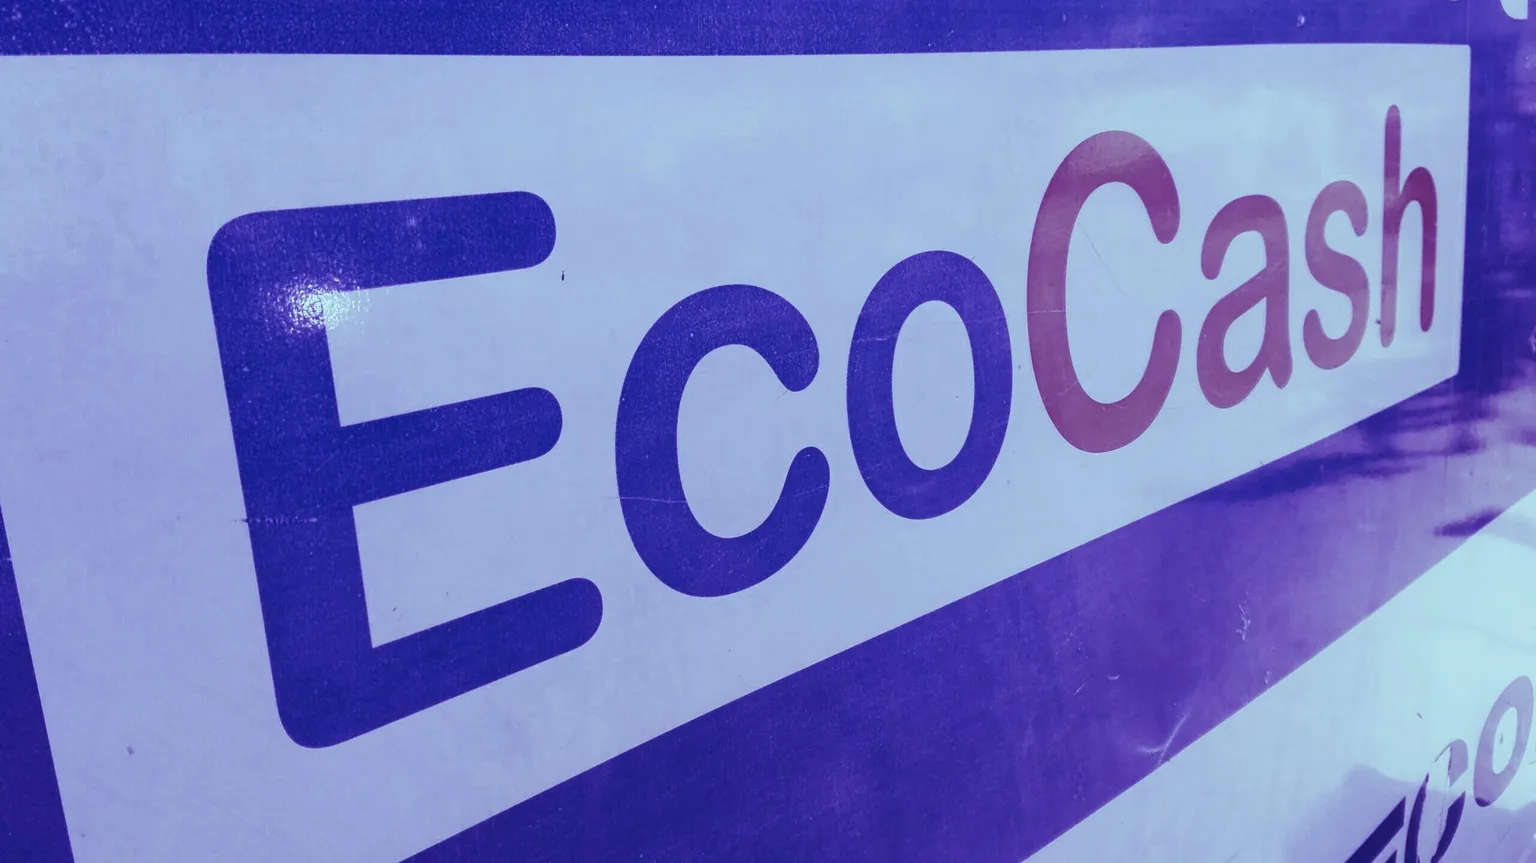 EcoCash accounts for 95% of mobile money transactions in Zimbabwe. Image: Shutterstock